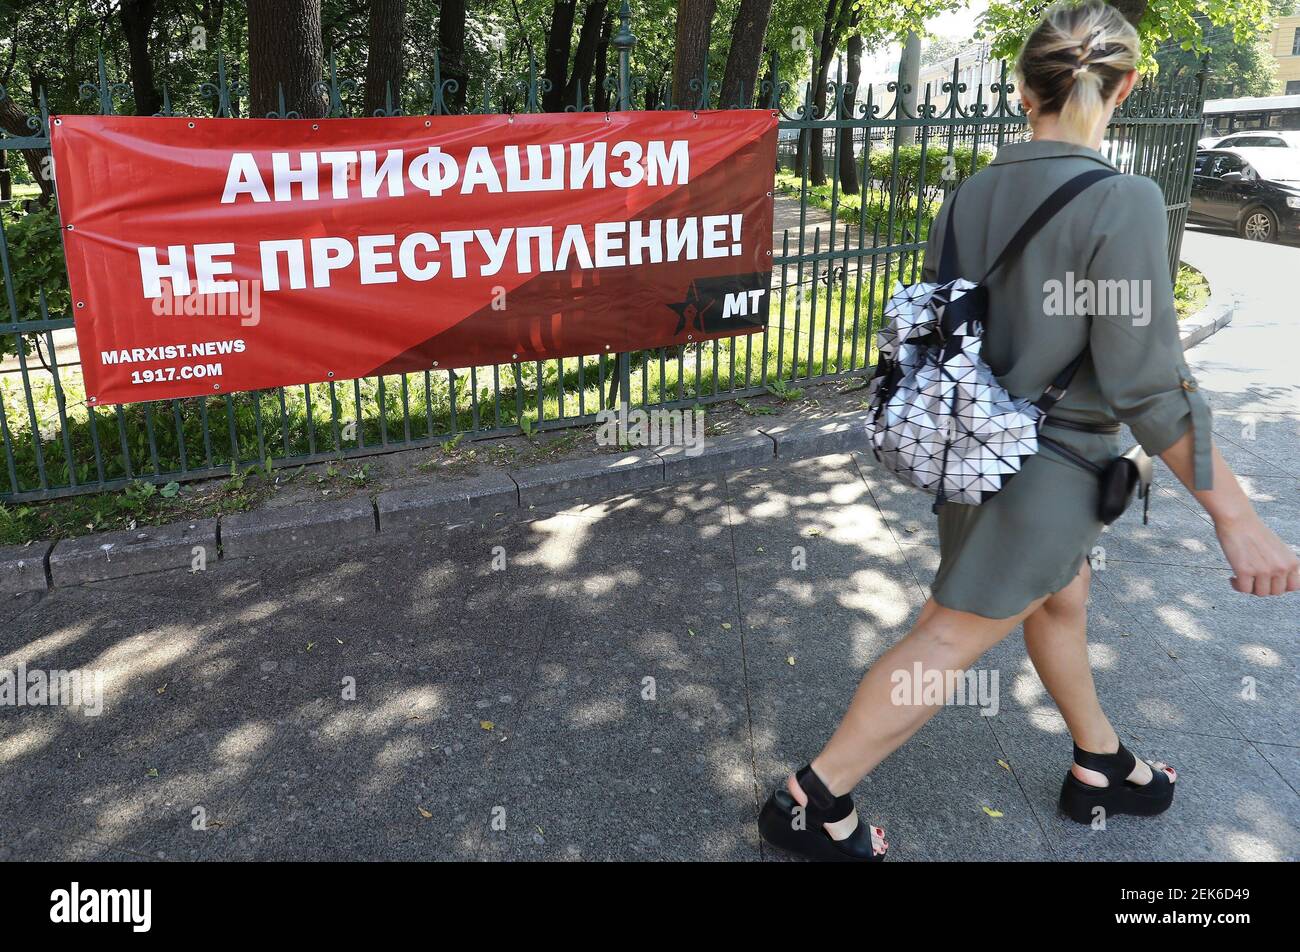 Thu., Jun. 18, 2020, Russia, St. Petersburg. Regular hearing of the Moscow District Military Court in the case of Yuliy Boyarshinov and Viktor Filinkov, accused under Part 2 of Art. 205.4 of the Russian Criminal Code 'Organization and Participation in the terrorist group' (The Network Case). Banner at the courthouse reading: 'Antifascism is not a crime!' Kommersant Photo/David Frenkel' #RU 18.06.2020, ??????, ?????-?????????. ????????? ????????? ??????? ????????? ????????? ???????? ???? ? ?????? ???????????? ?????????? ???? ? ????????? ???? ?????????? ? ??????? ?????????, ?????????? ?? ?. 2 ?? Stock Photo